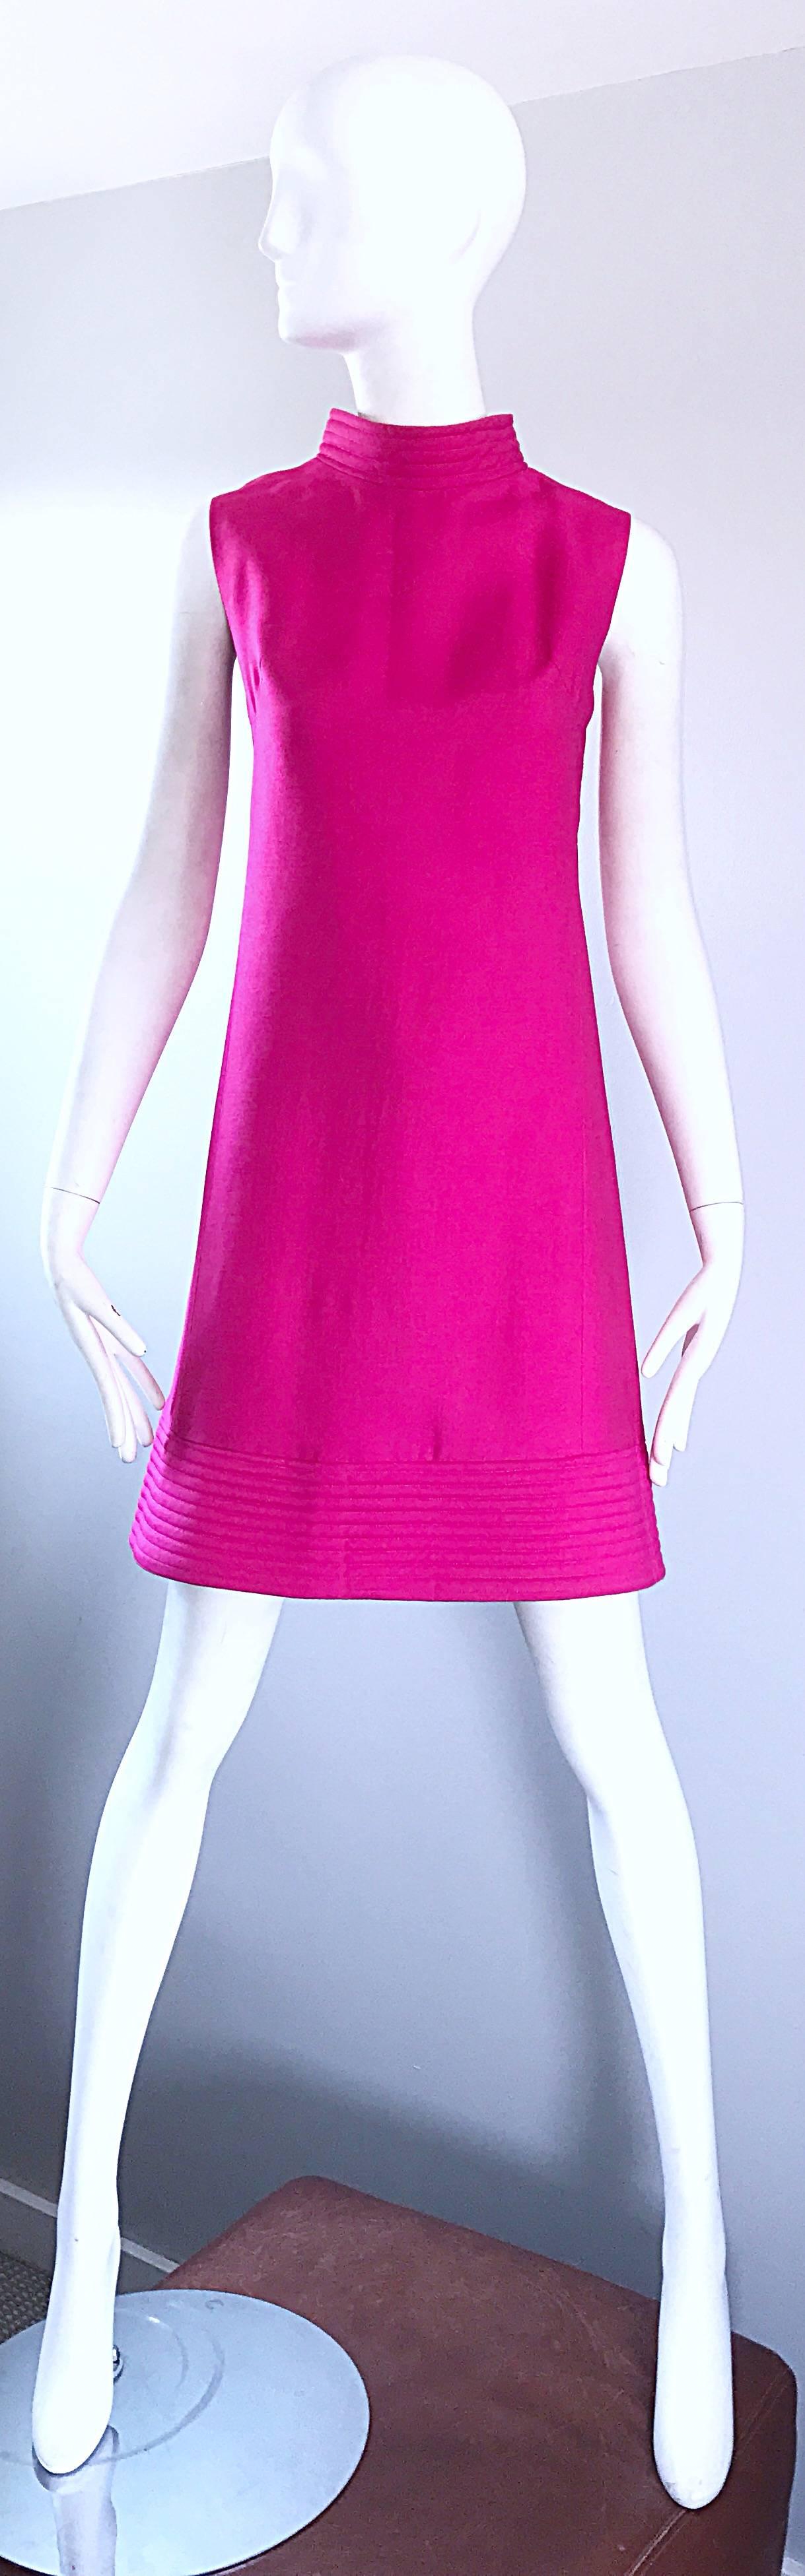 Chic 60s hot pink sleeveless silk shift dress! Features an embroidered high neck that matches the hem. Flattering tailored bodice, with a slight A-Line skirt. Full metal; zipper up the back with hook-and-eye closure. Great for any day or evening